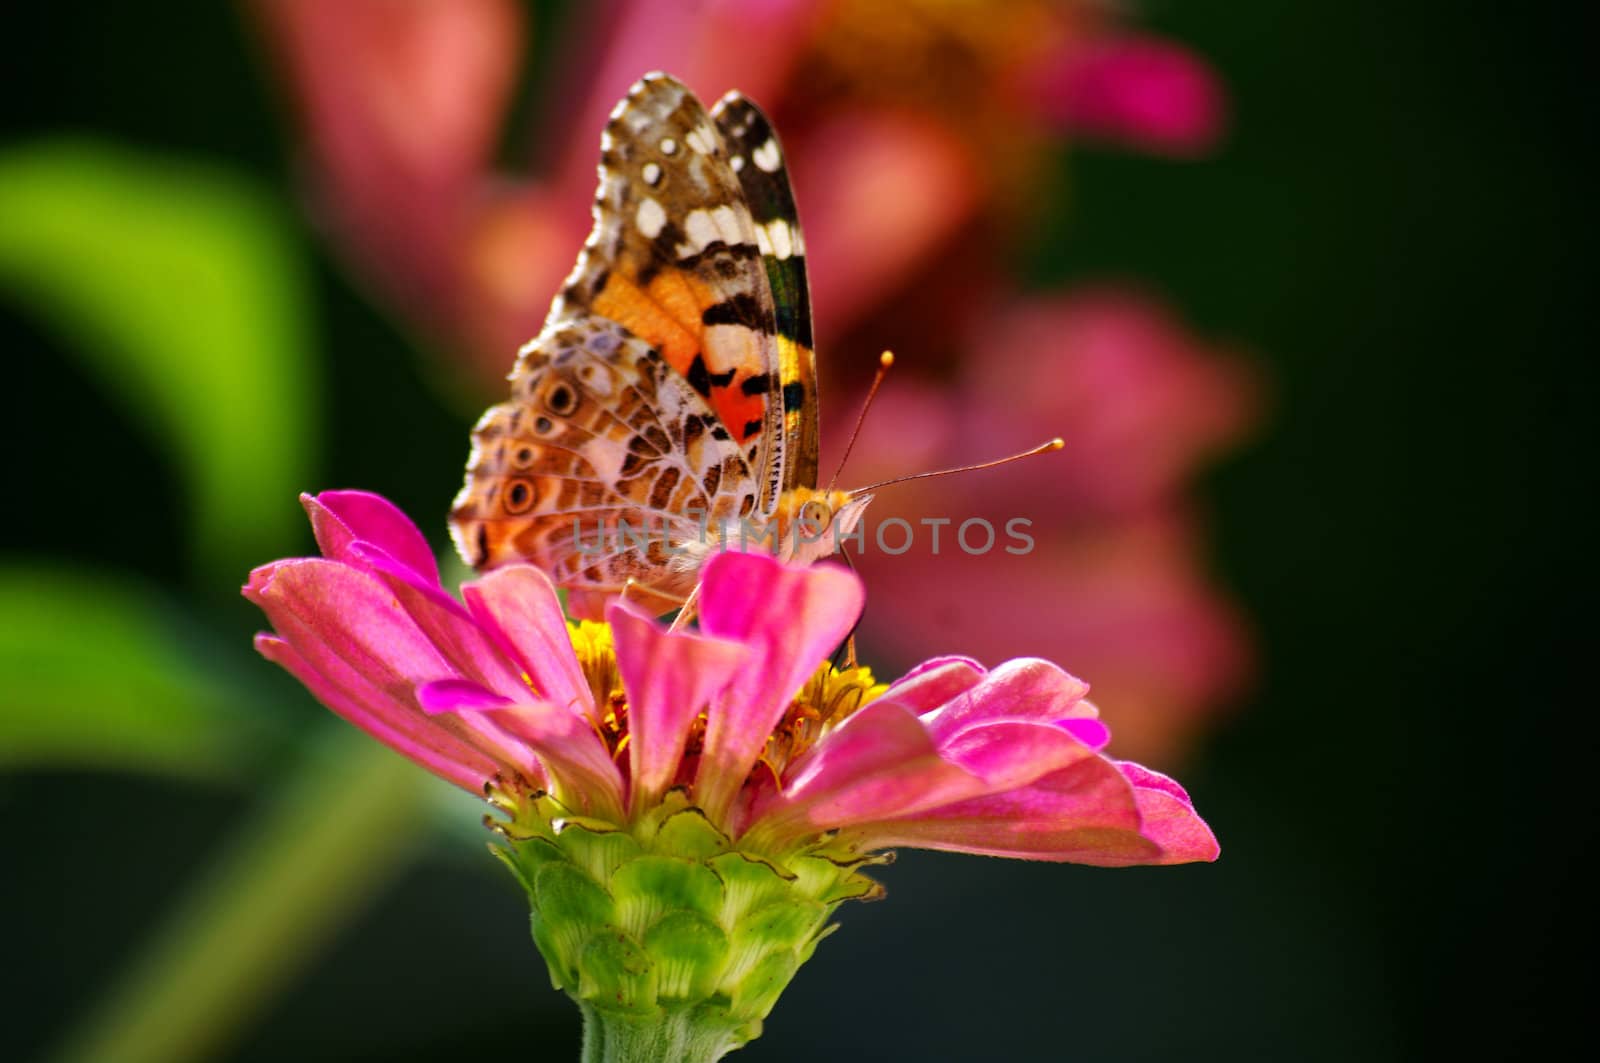 Butterfly & flower (lepidoptera) by Leont